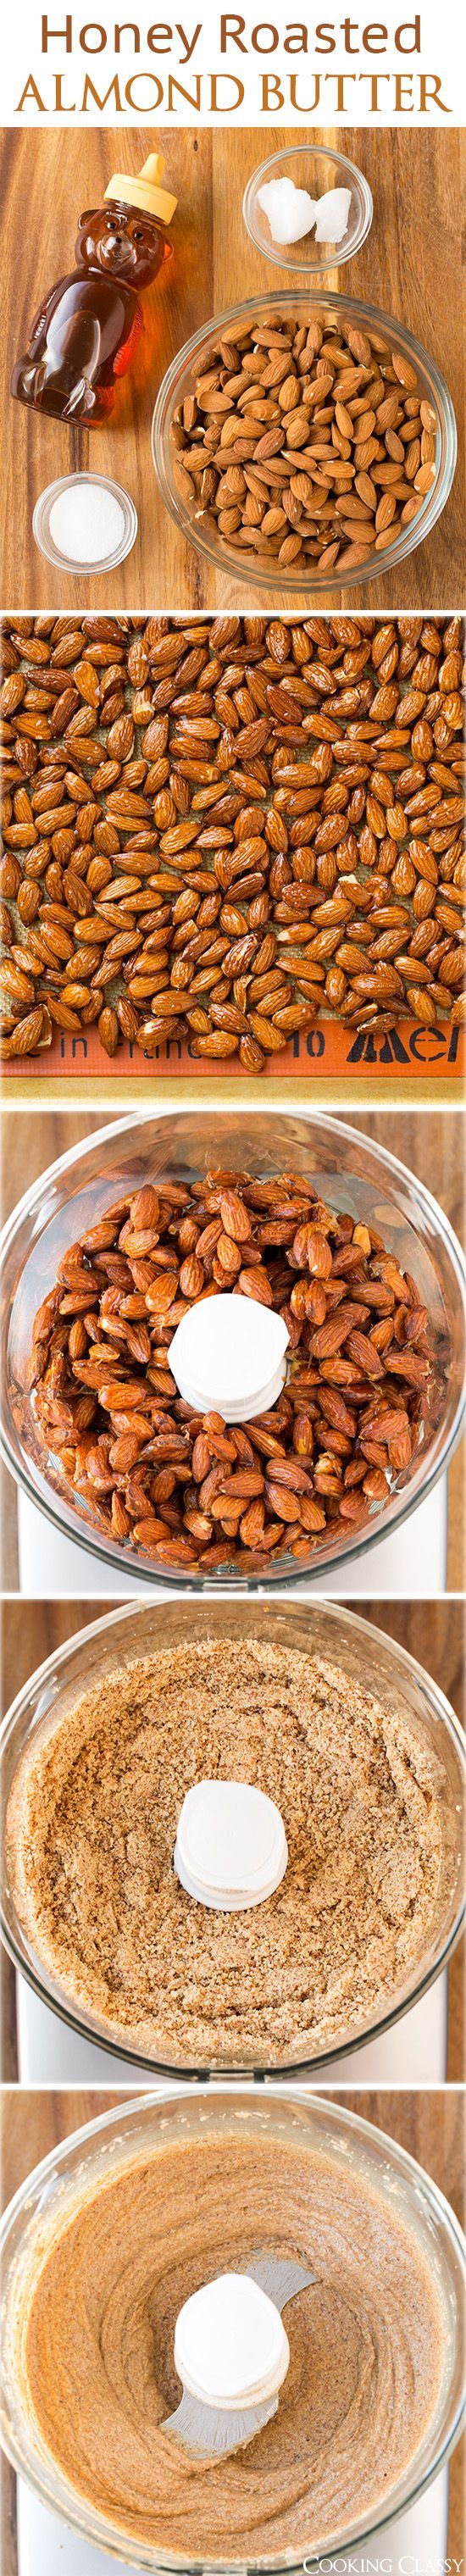 Honey Roasted Almond Butter – this stuff is the BEST! Easy to make, 4 ingredients, and so good for you!